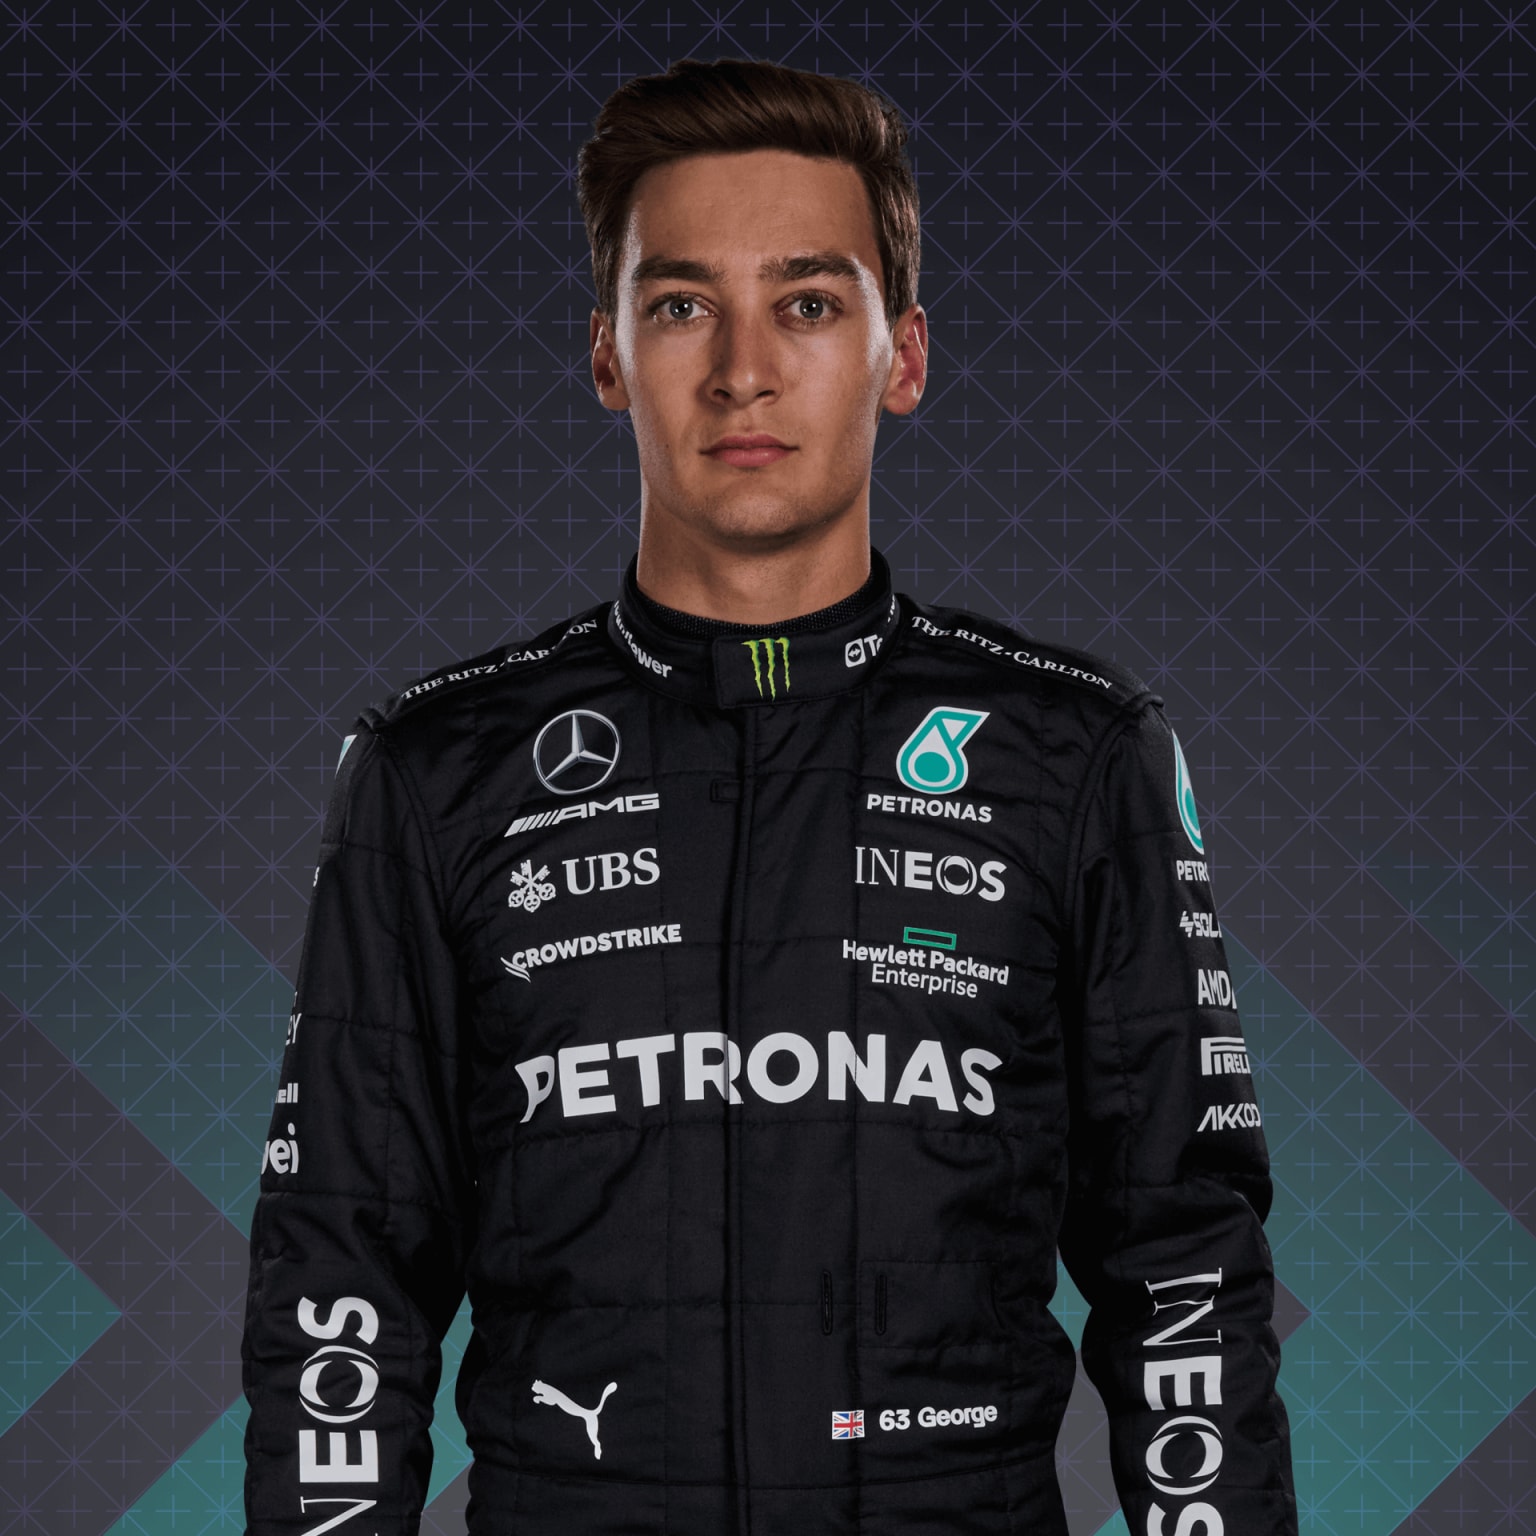 Russell F1 Driver for Mercedes